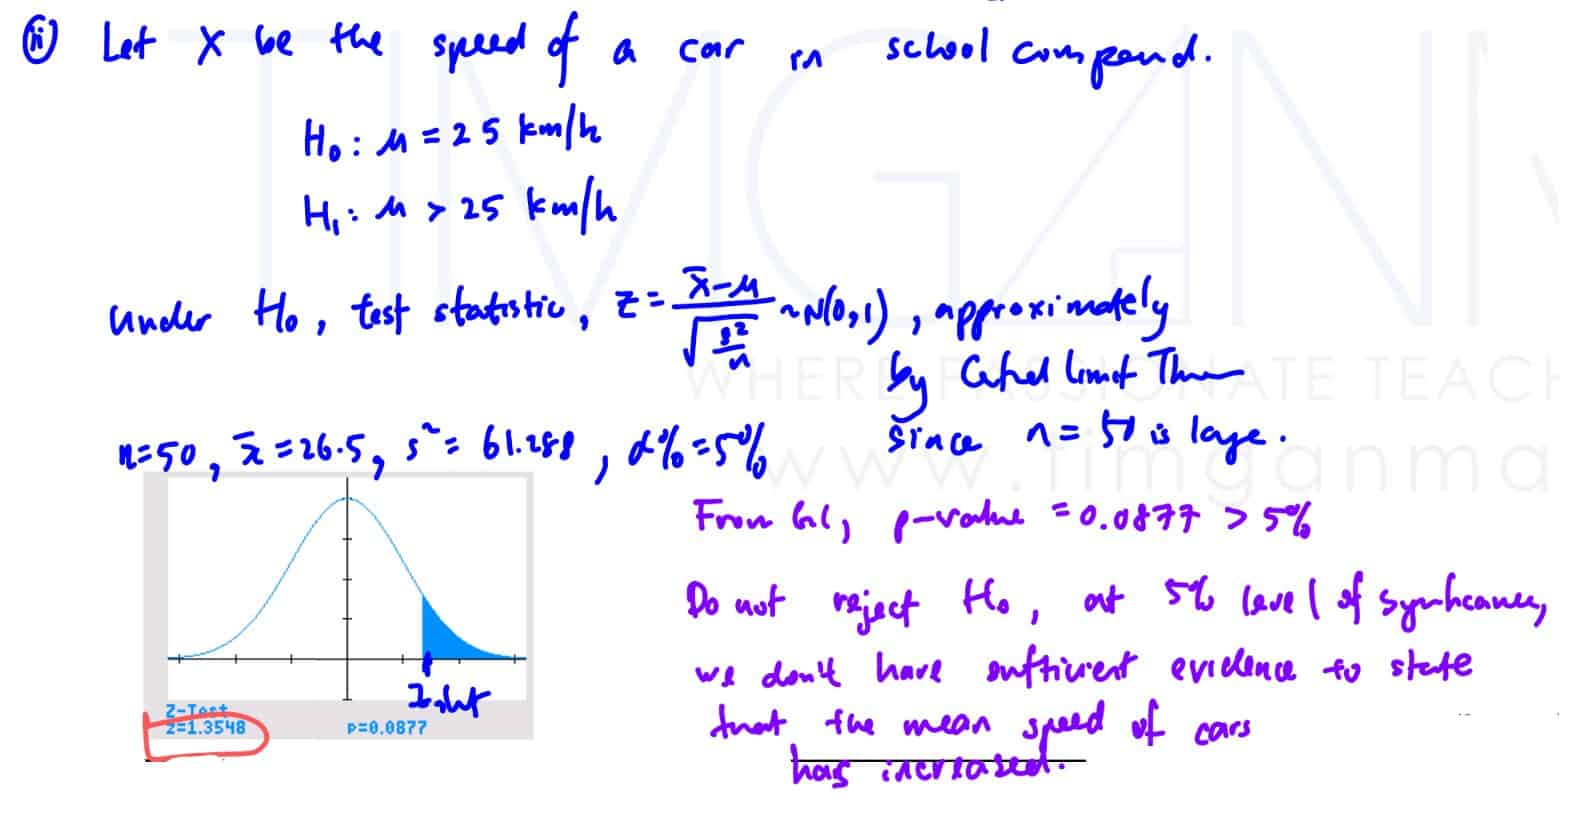 hypothesis testing A-Level (H2 Math) Hypothesis Testing Free Resources